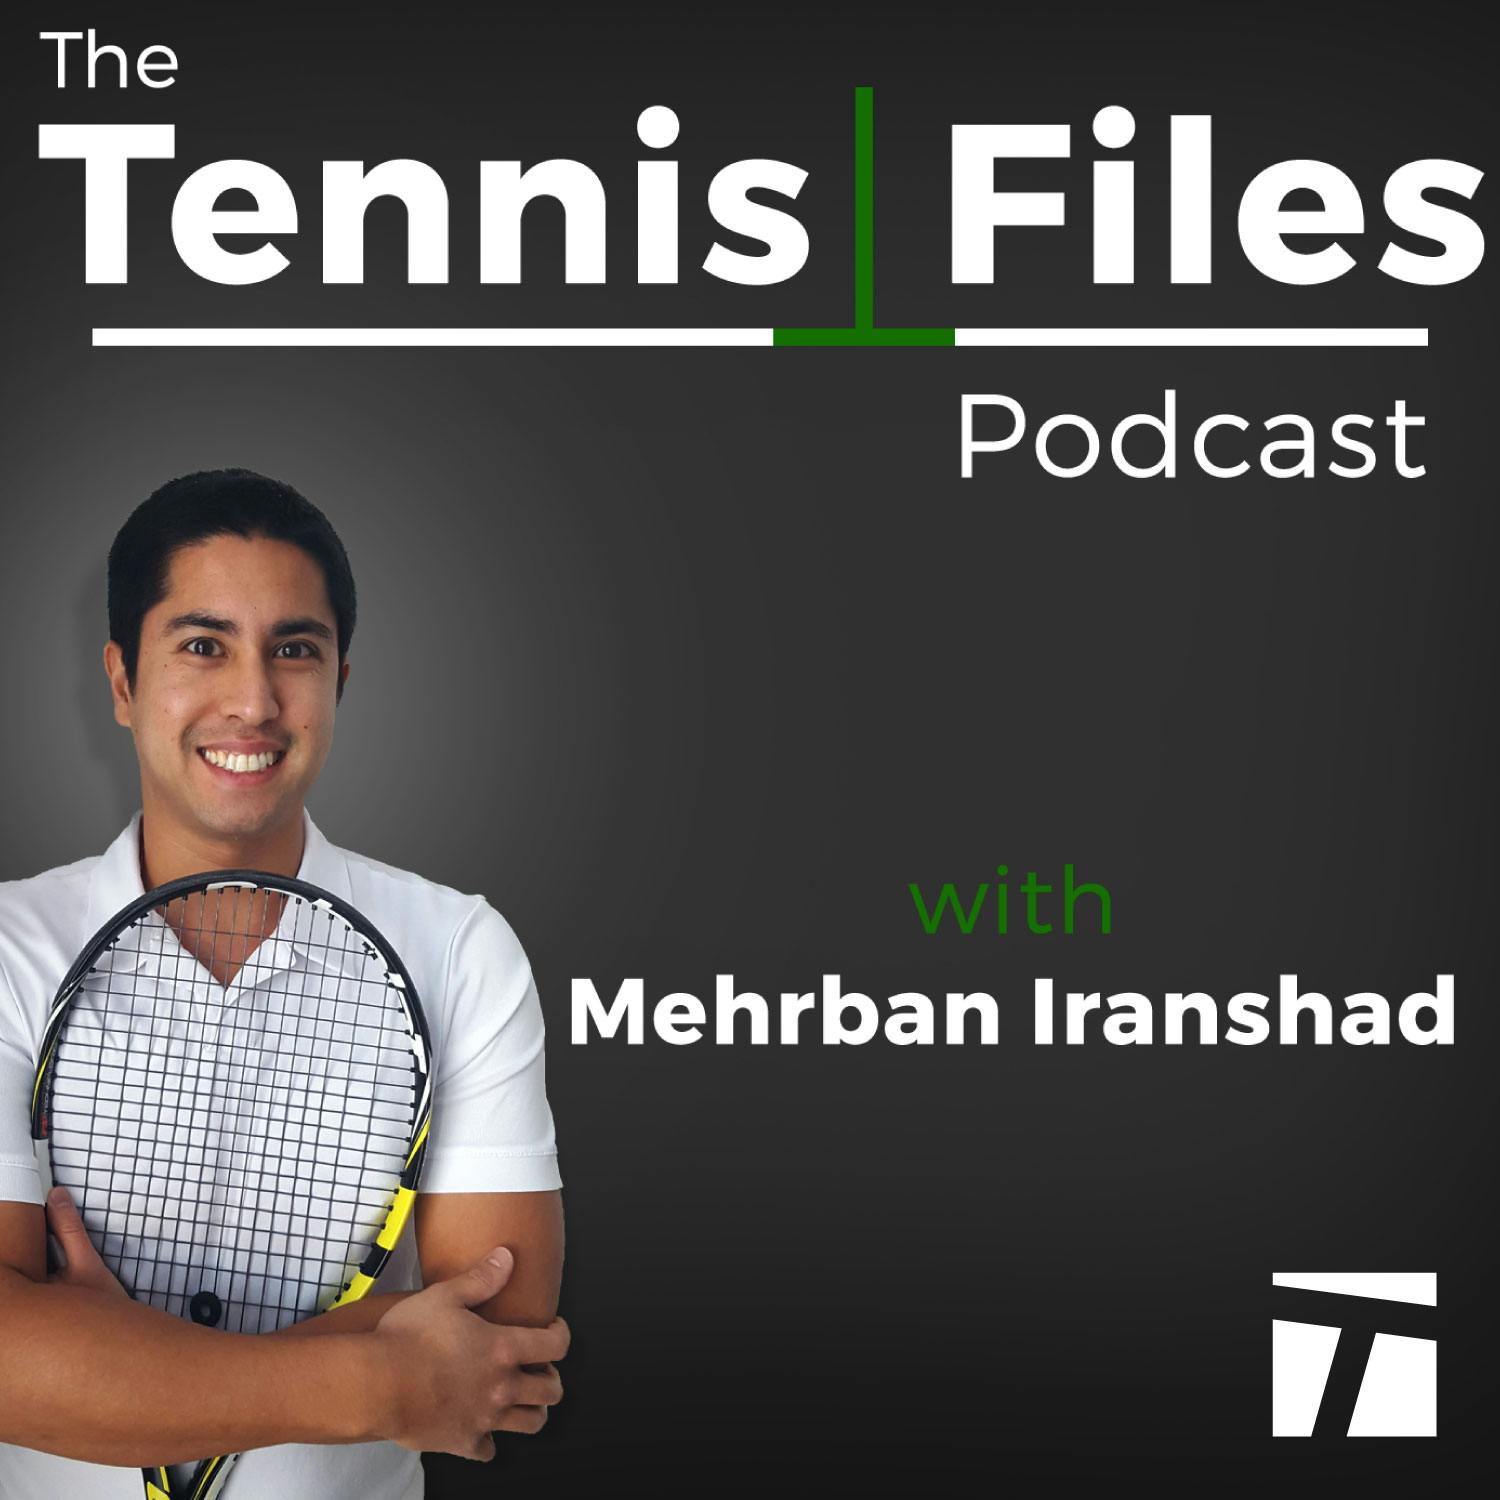 TFP 342: Q&A Edition – Serve Returns, Mental Game Advice, First Serve Power, and More! - From the 2021 archives